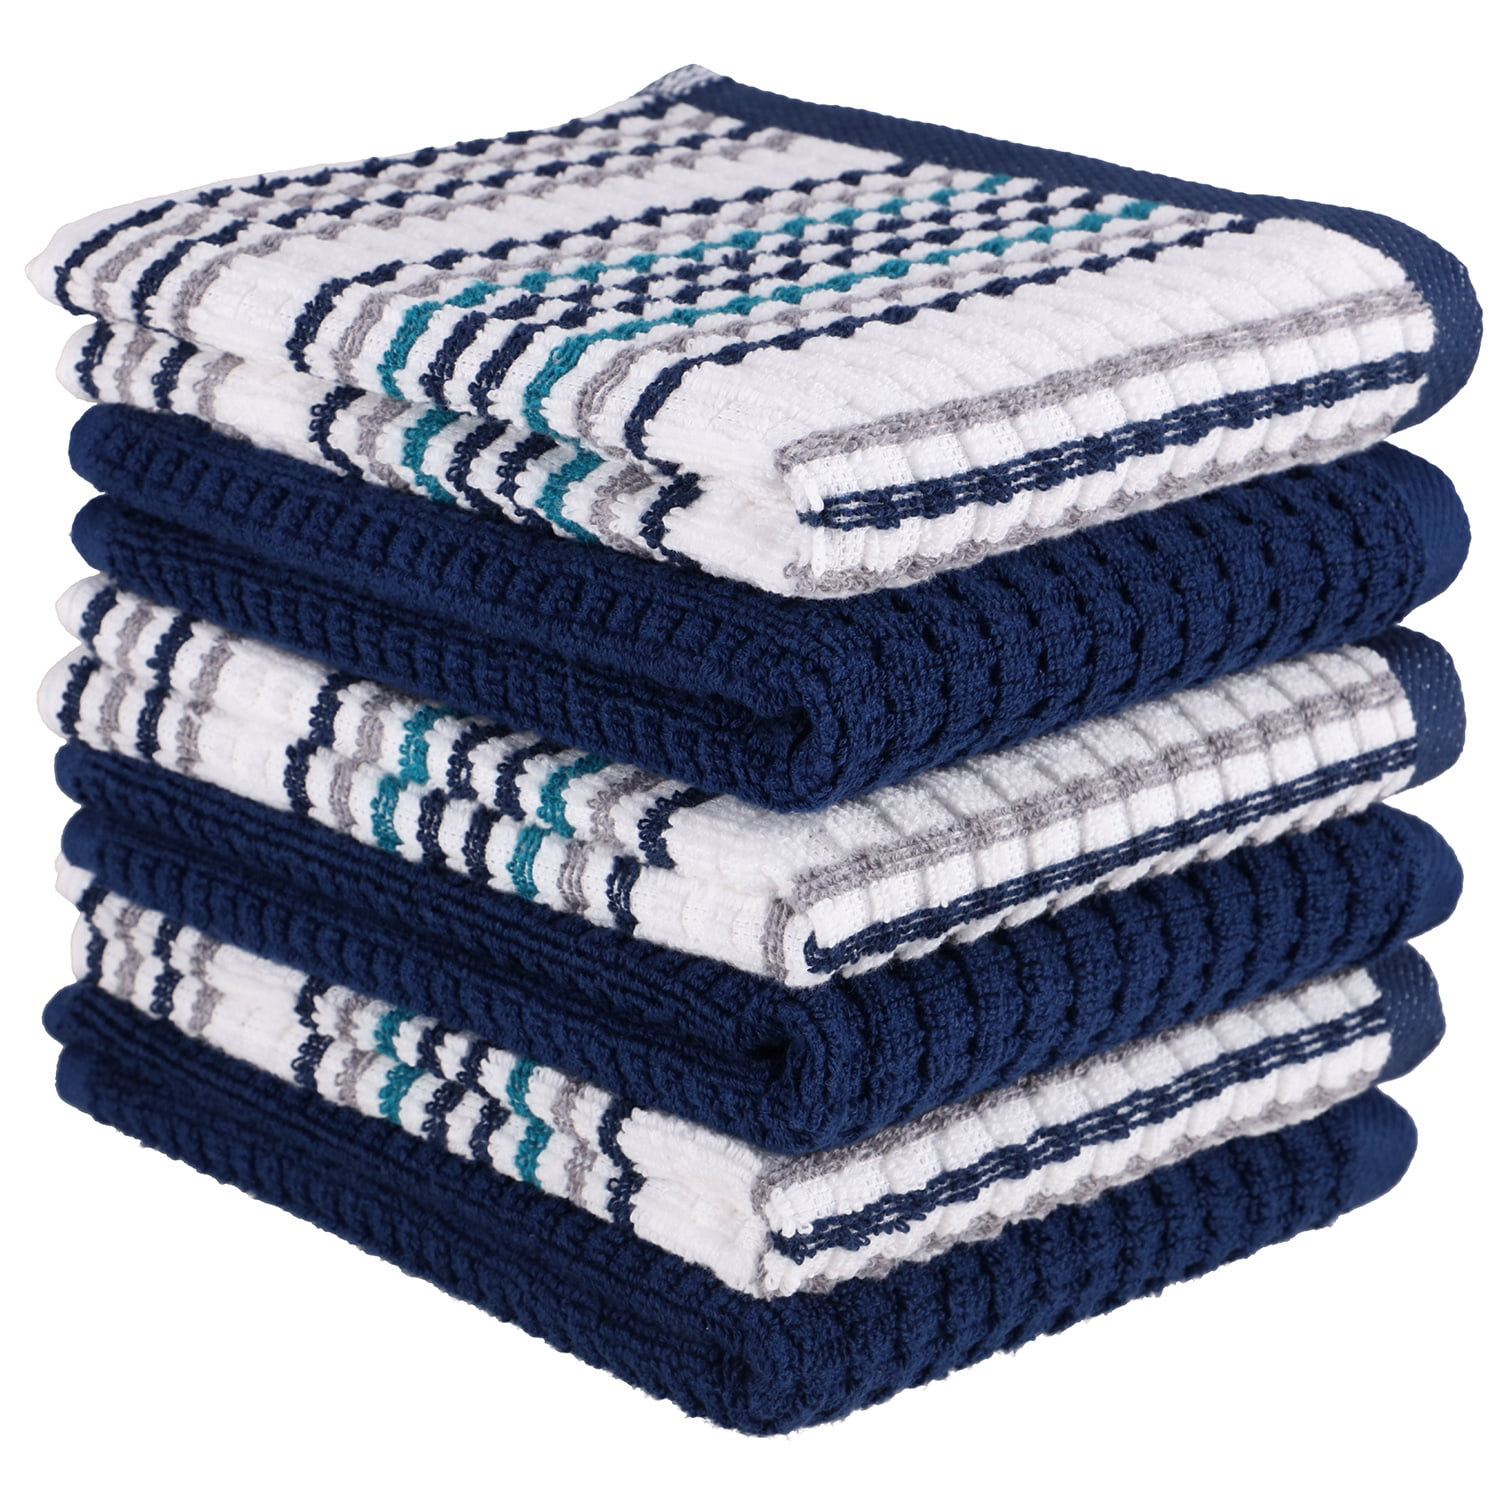 Jay Ford 6-Pack Cotton Kitchen Dish Towels 15x26 6 Kitchen Towels with Green Stripe Tea Towels Kitchen Dish Cloths Absorbent Dish Towels Cotton